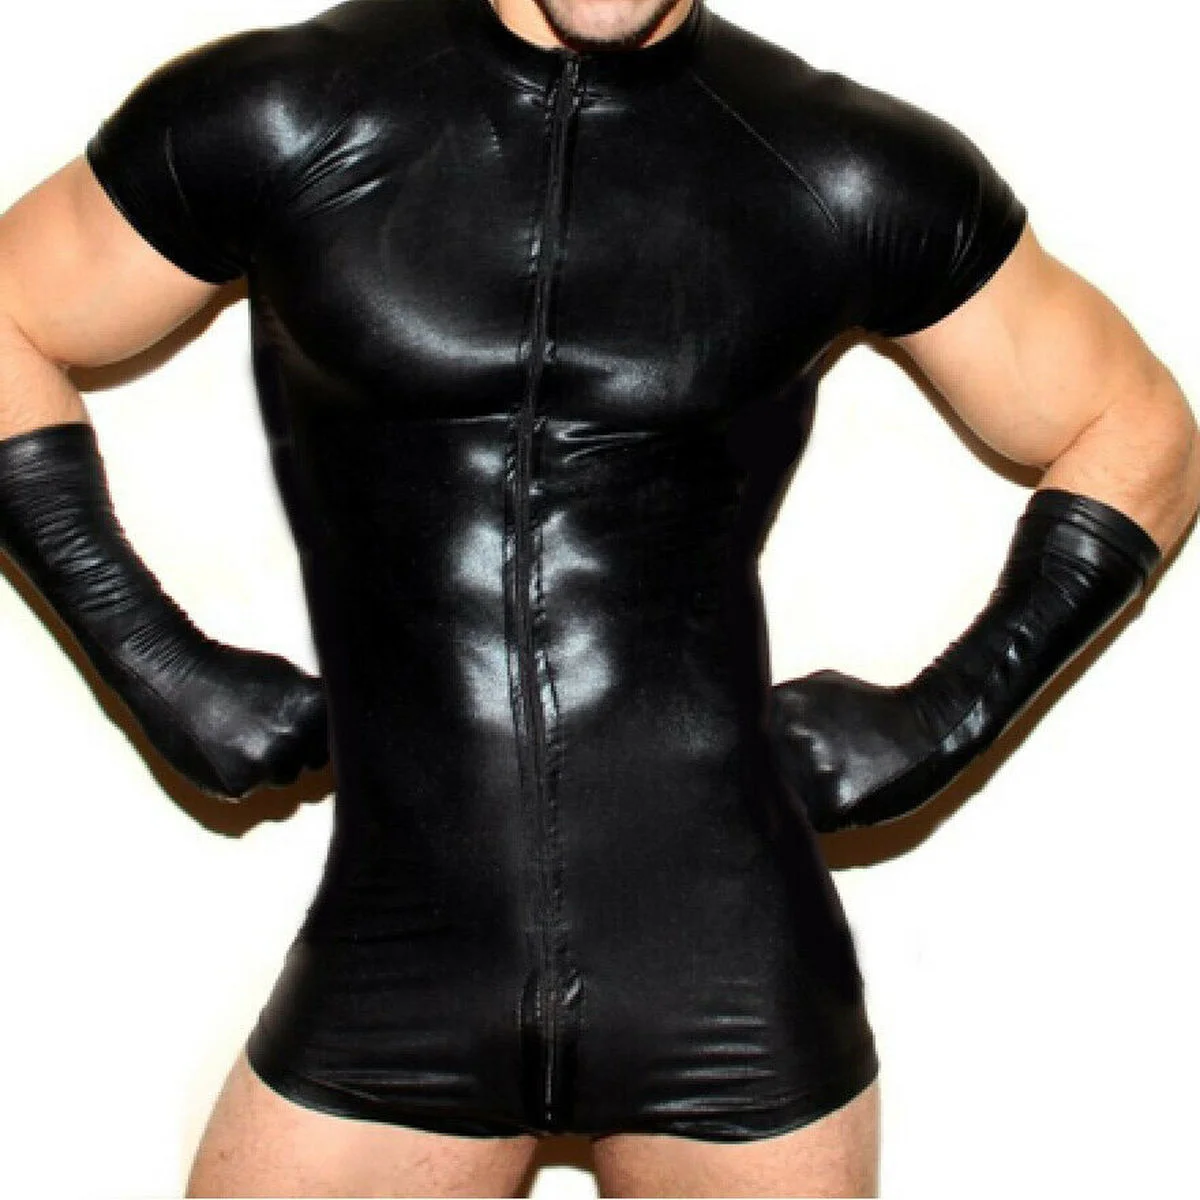 Latex Clubwear Catsuit Lingerie Leather Fetish Mens Club Wear - S-xxxl Male Leather pic pic